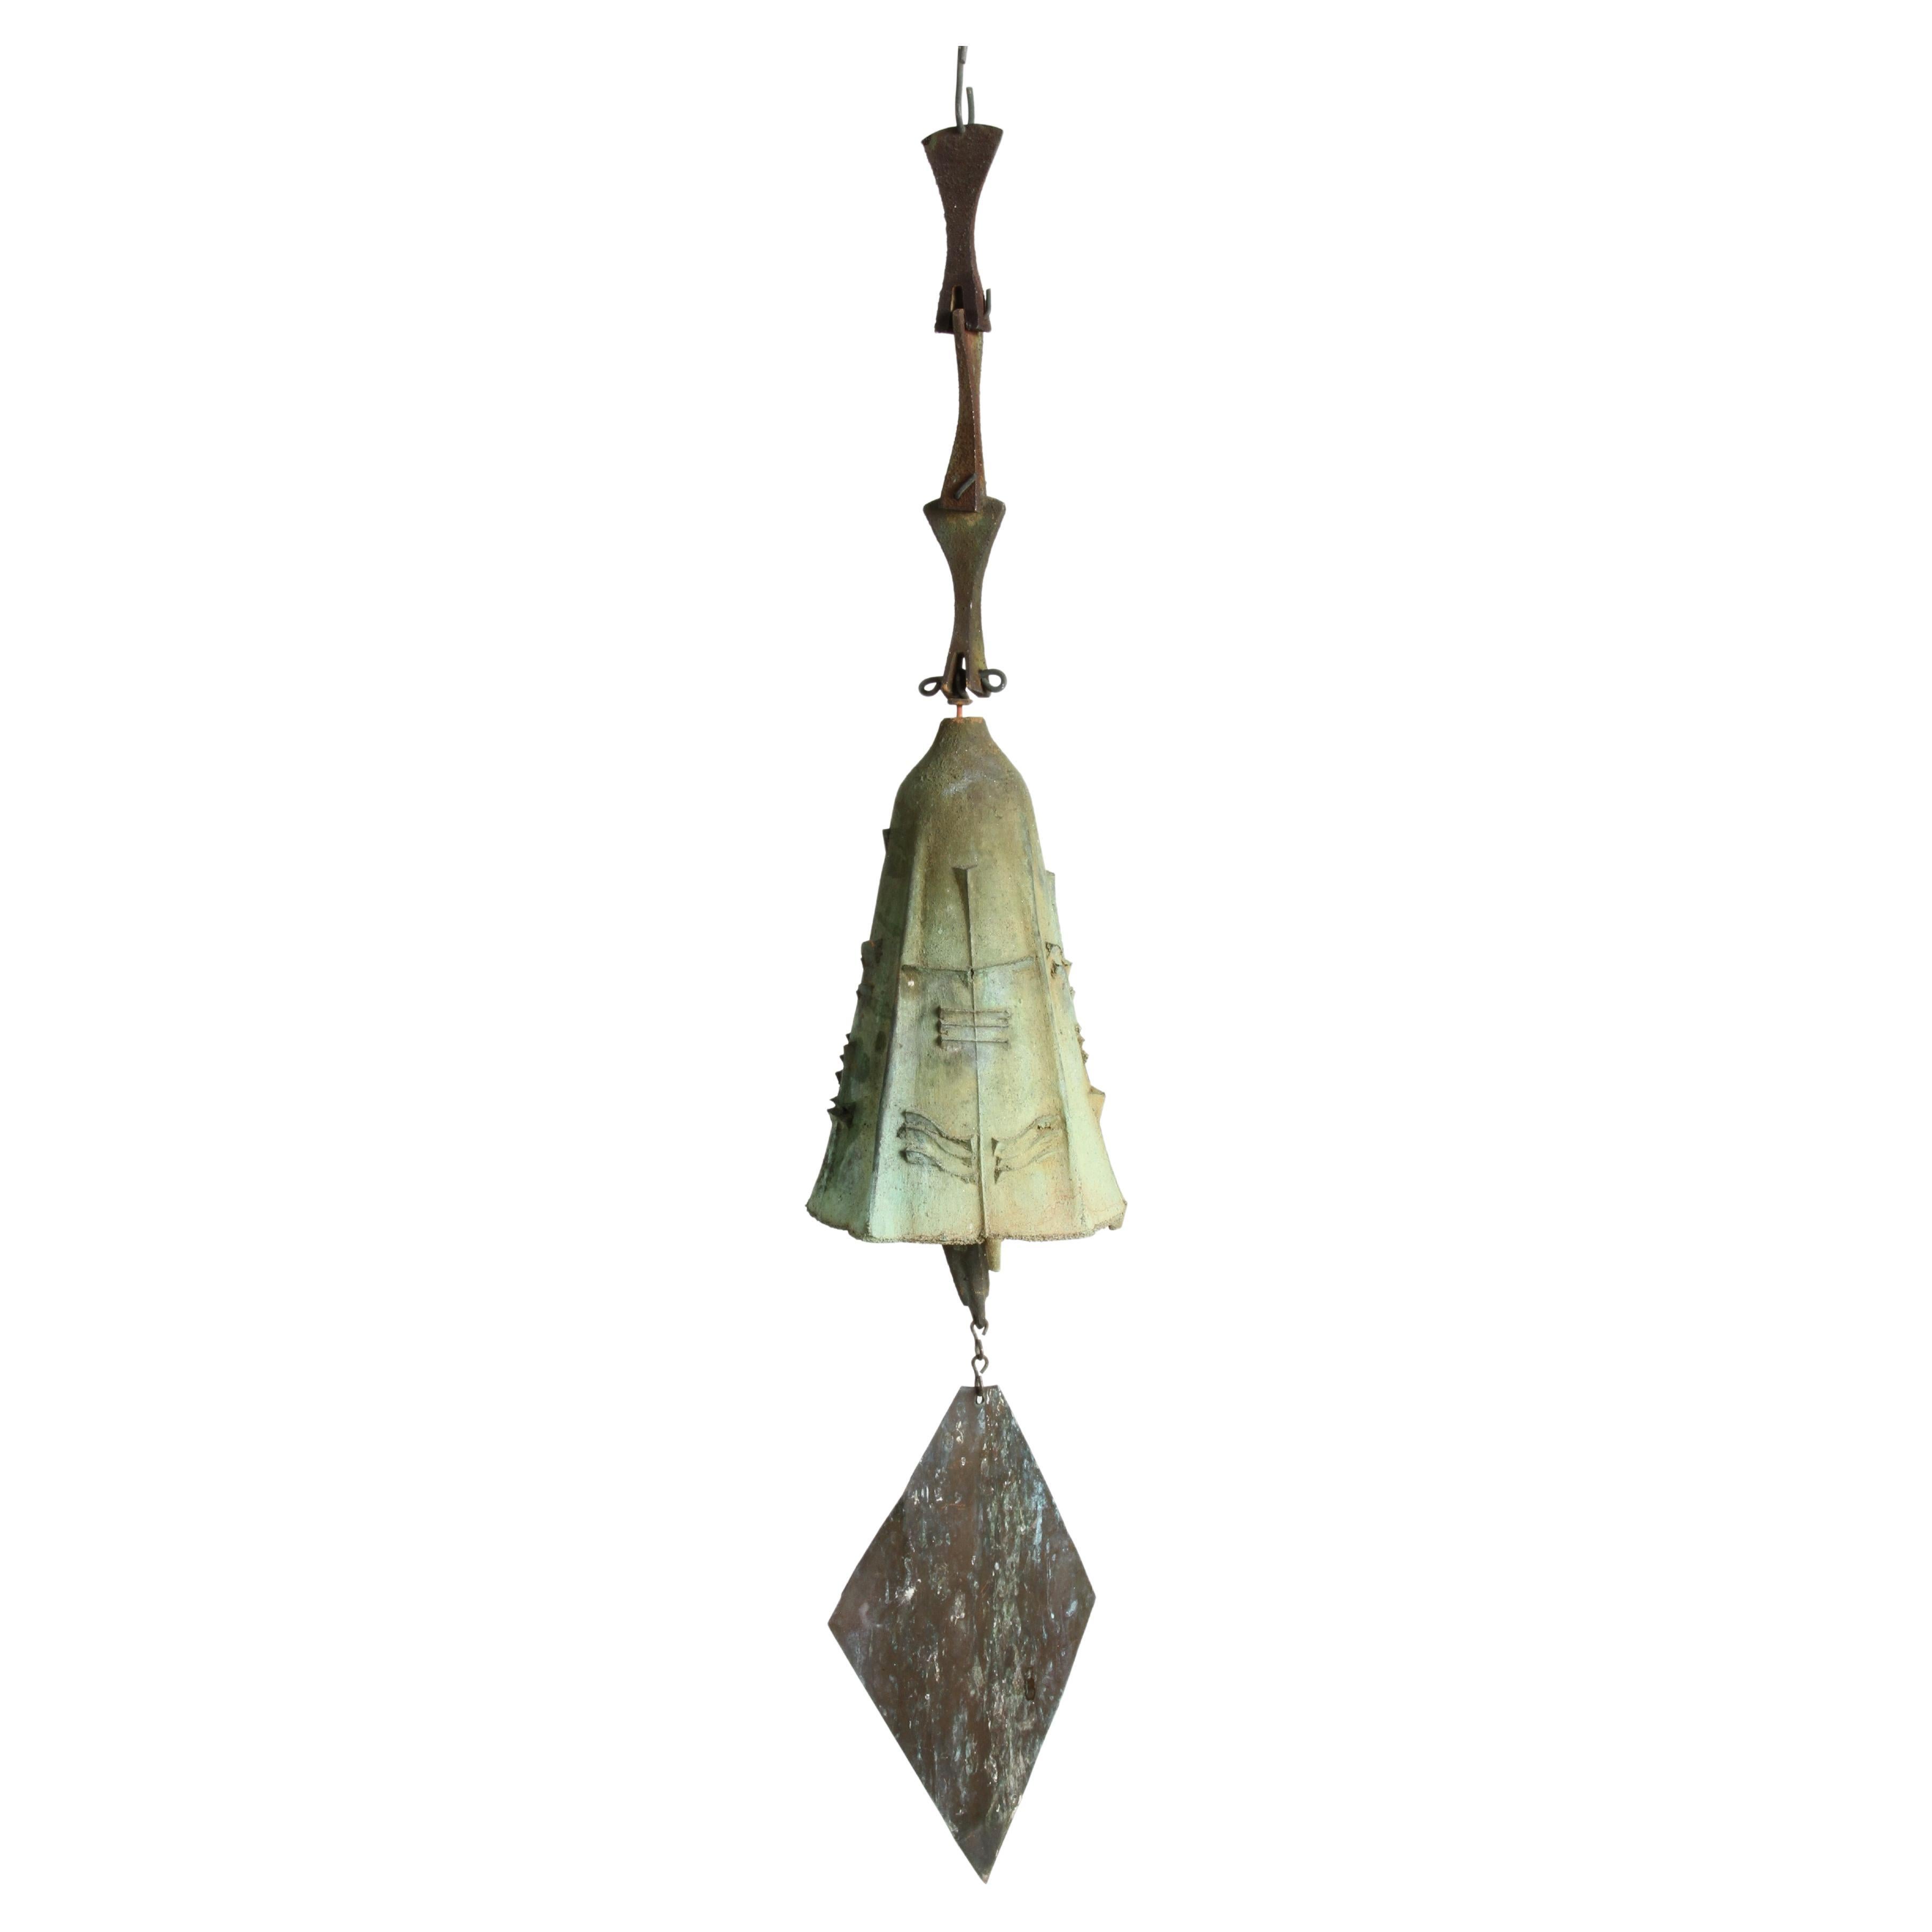 Early Large Scale Bronze Sculptural Wind Chime or Bell by Paolo Soleri - MCM For Sale